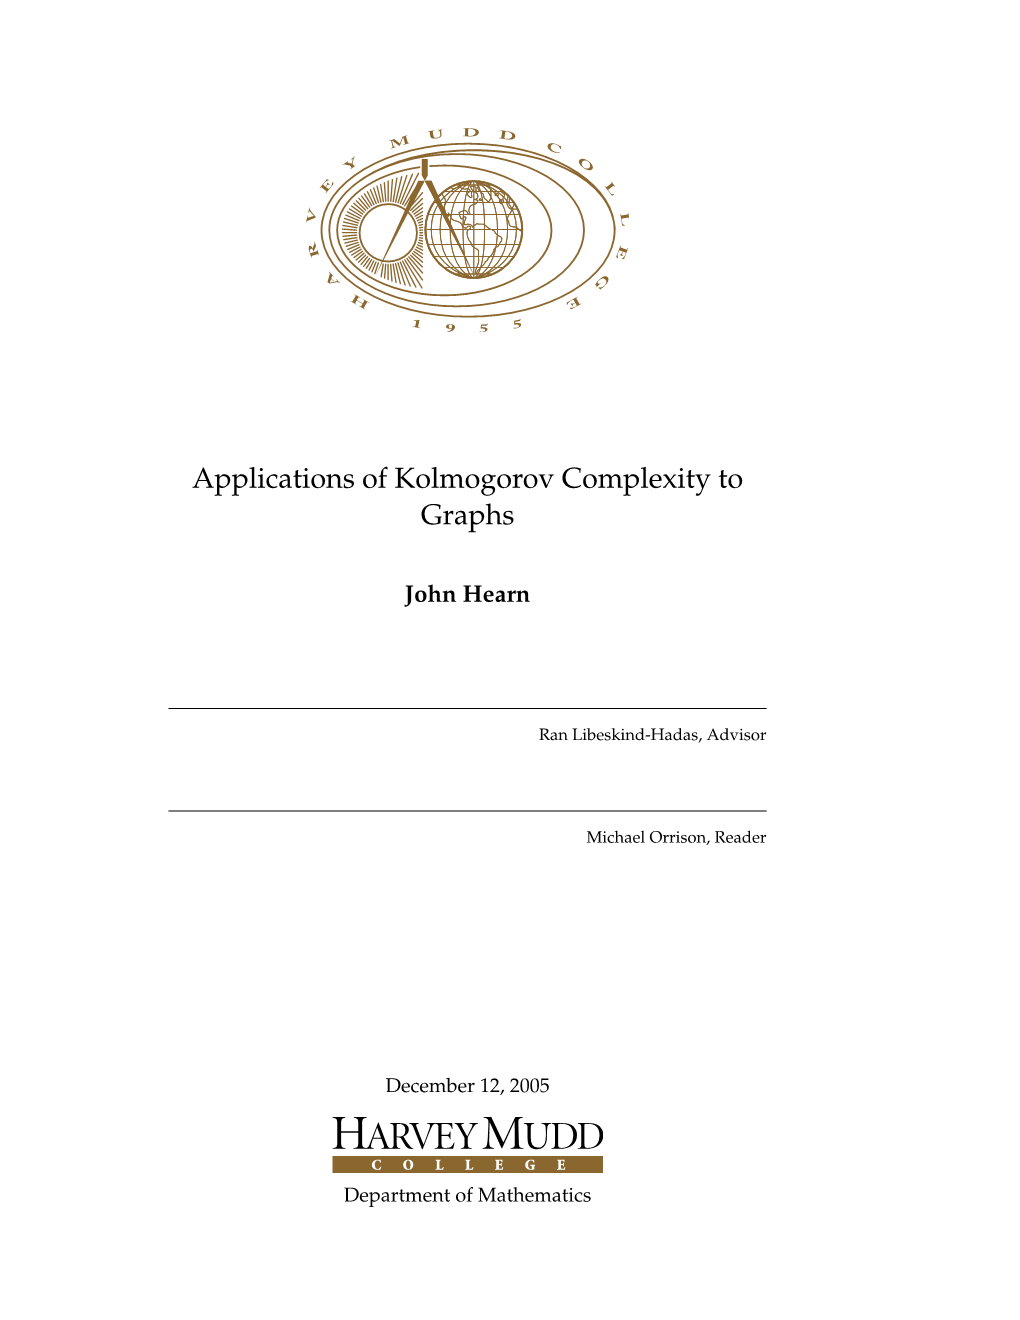 Applications of Kolmogorov Complexity to Graphs